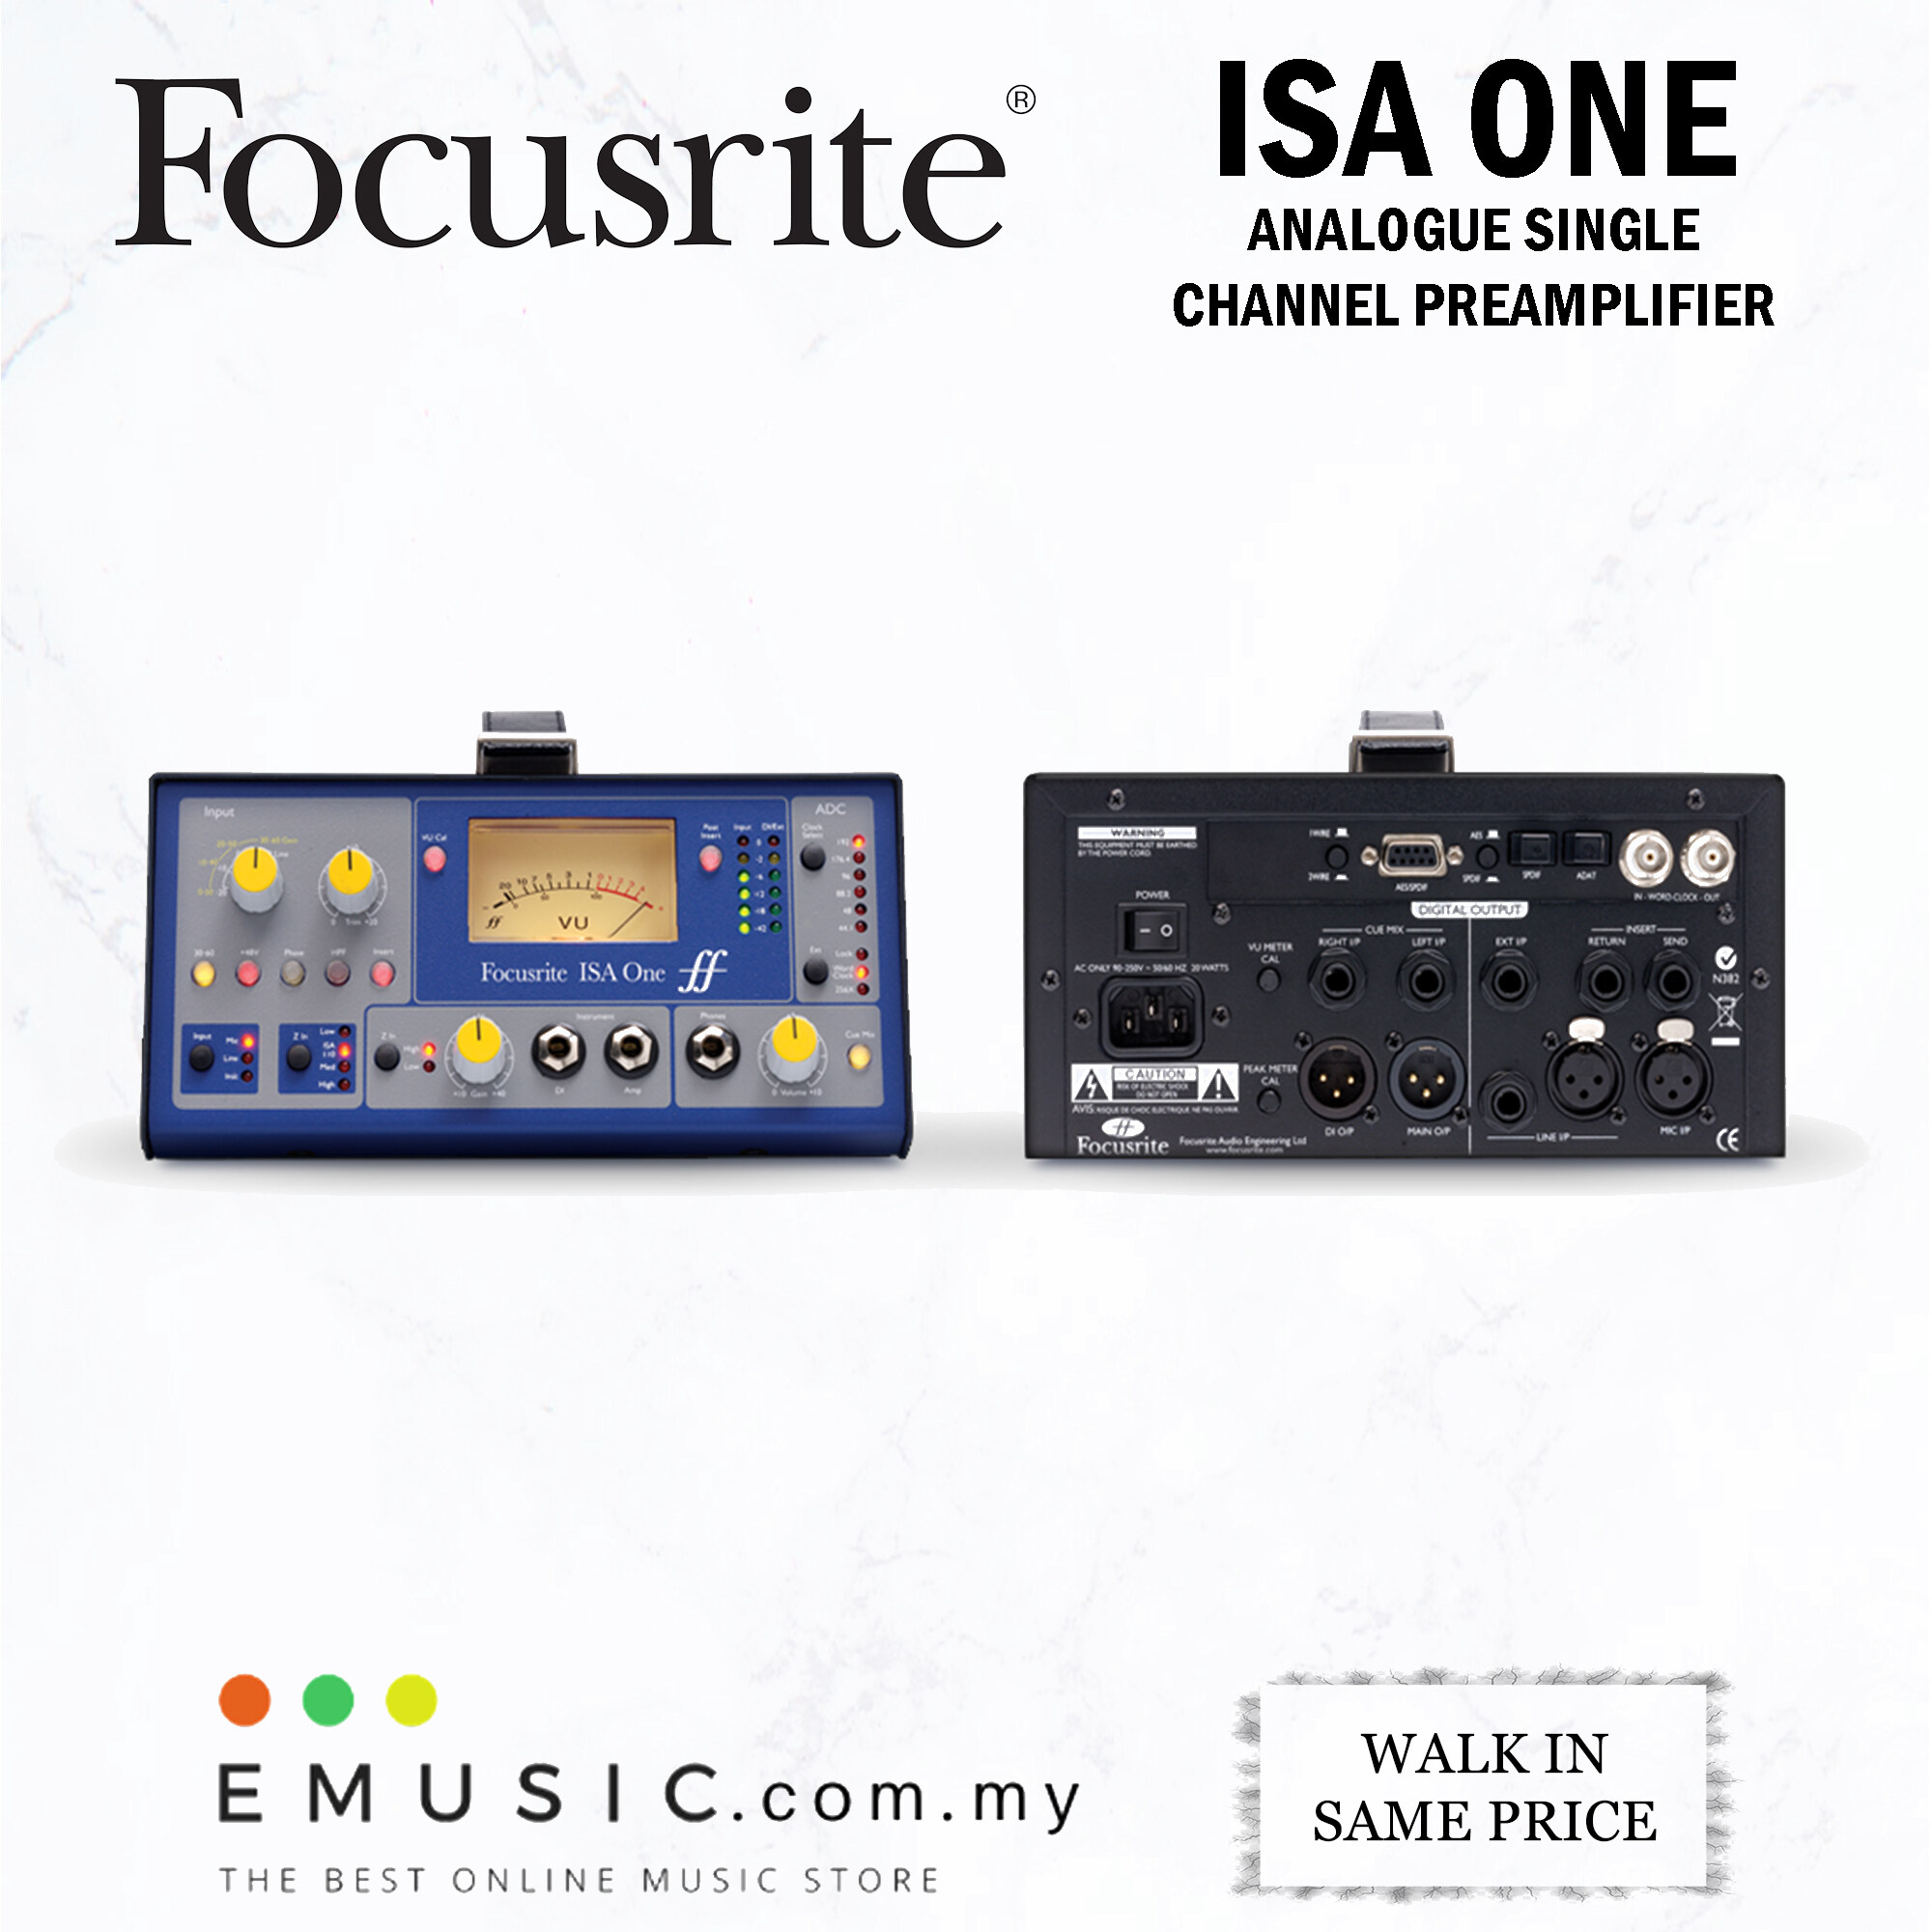 Focusrite ISA One Analogue Single Channel Preamplifier | Lazada